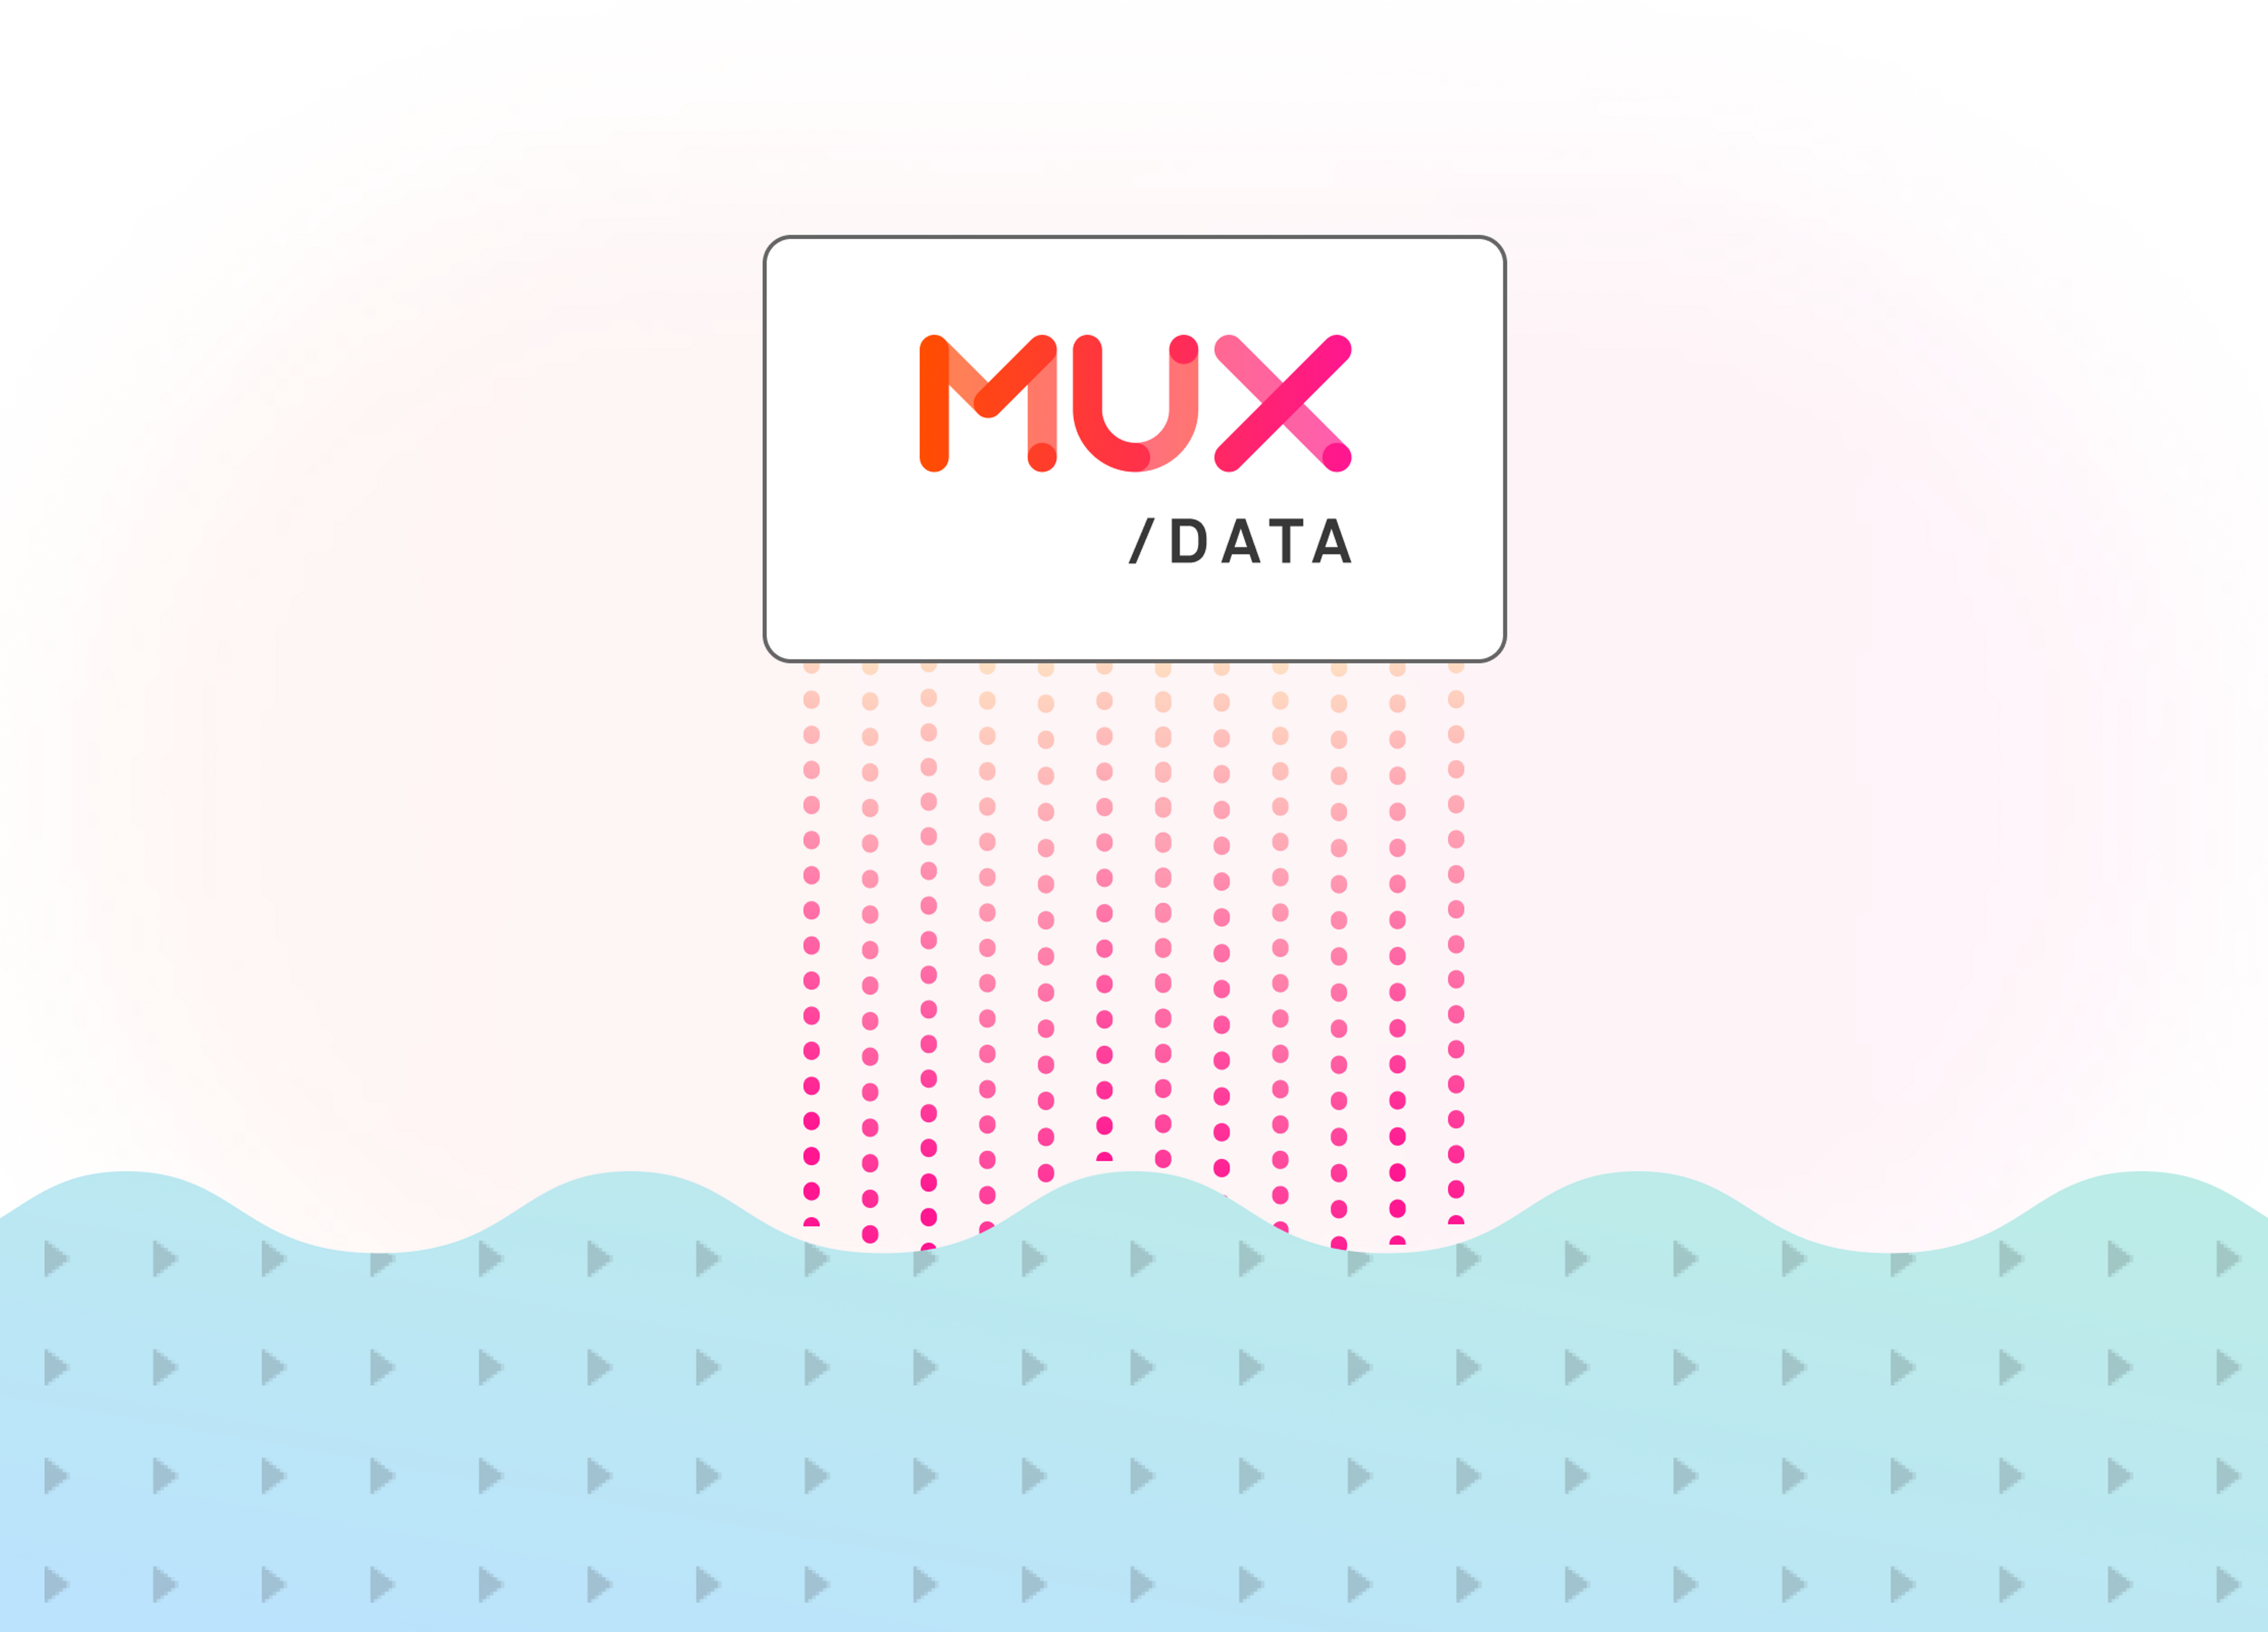 Streams of data emanating from Mux Data, populating a data lake.